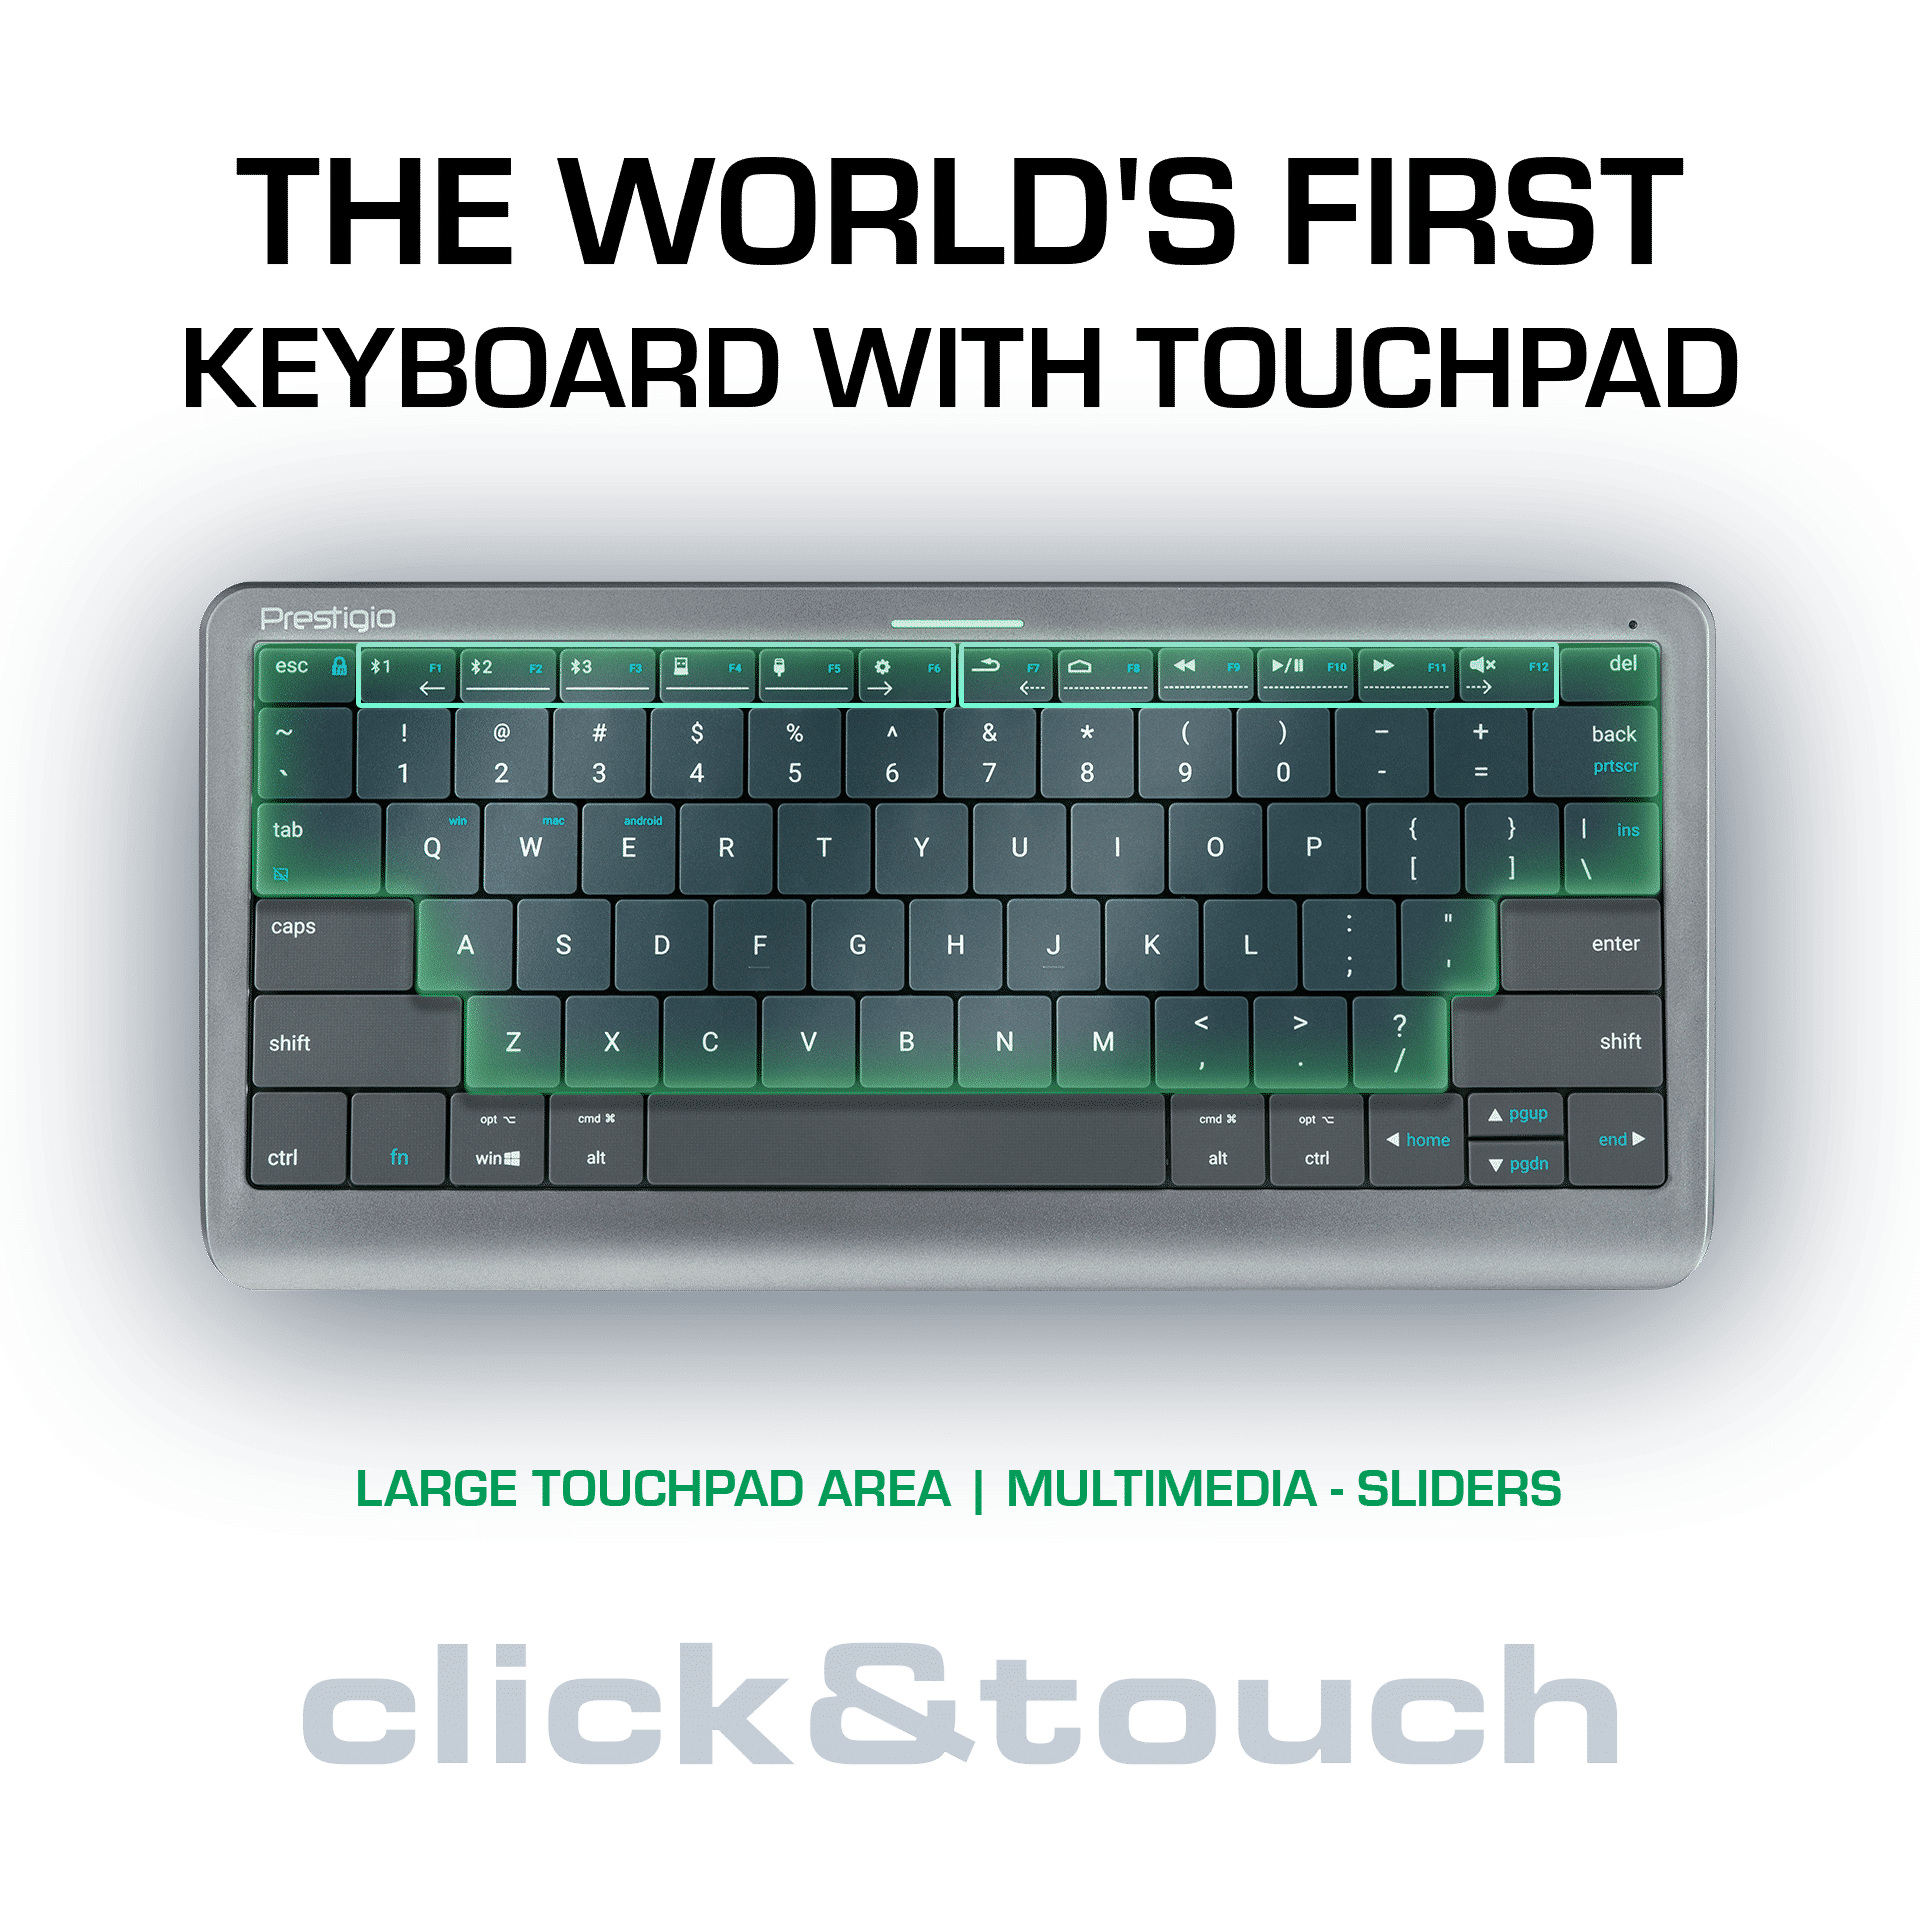 The world's first keyboard with touchpad
